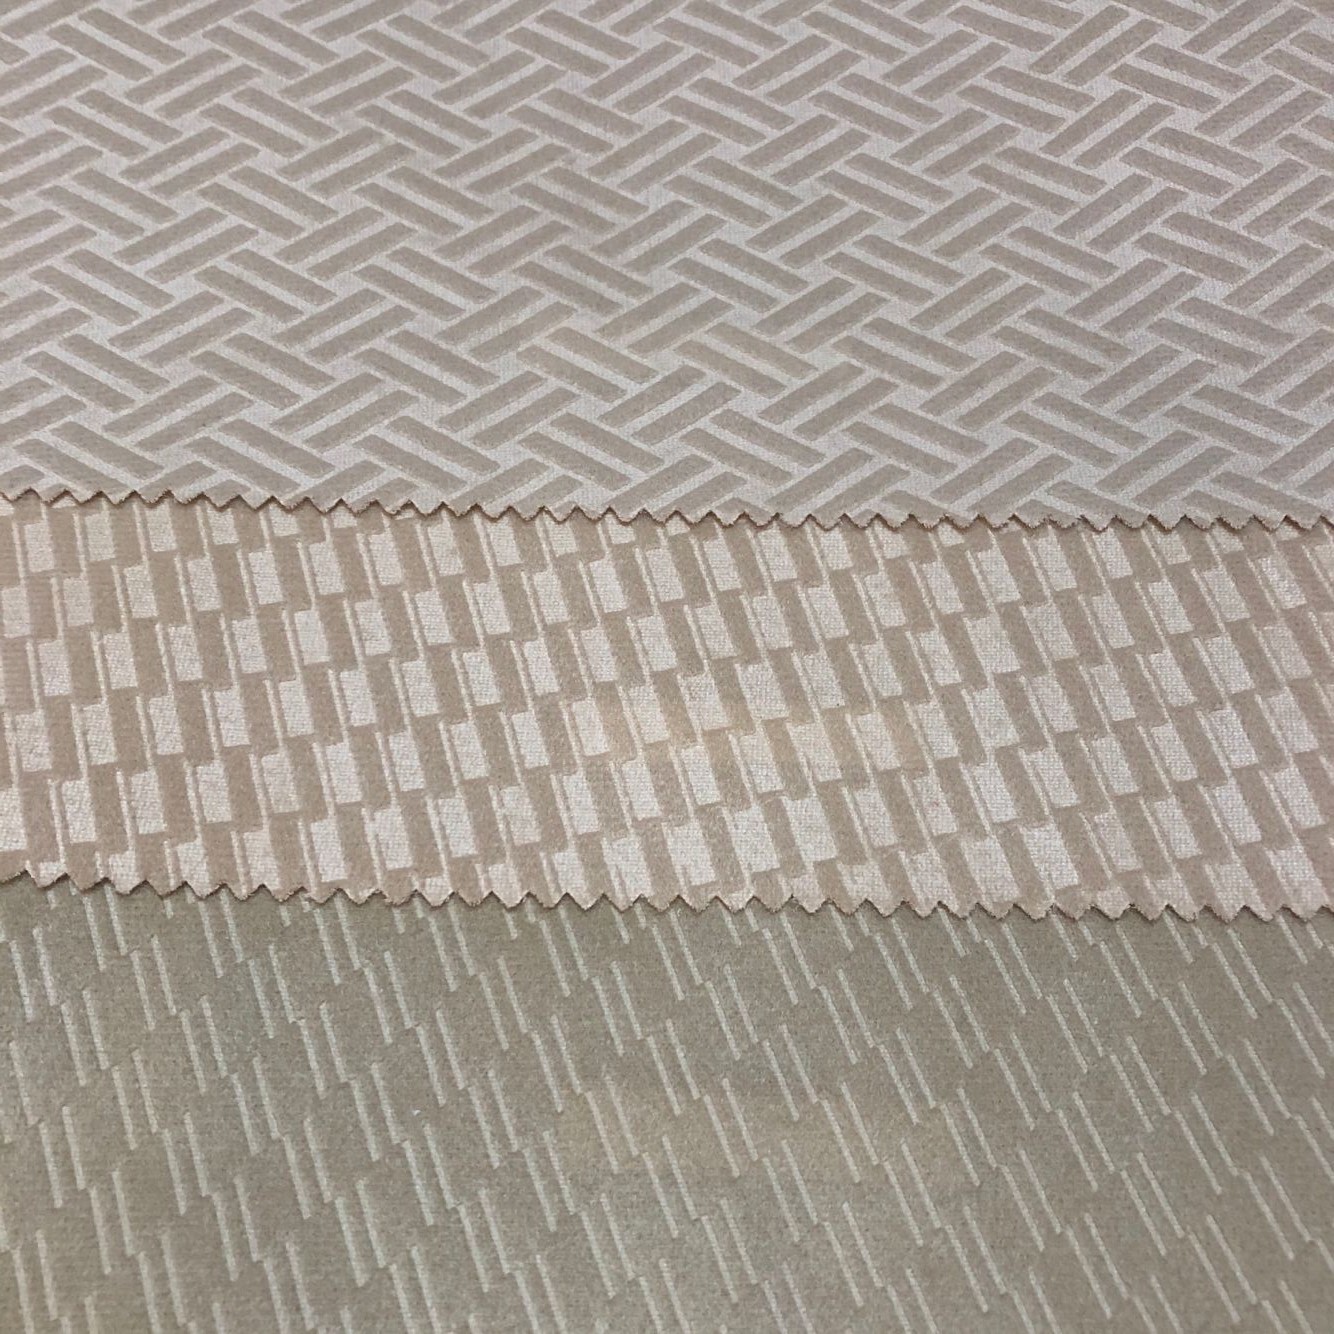 Embossed Car Fabric With Foam